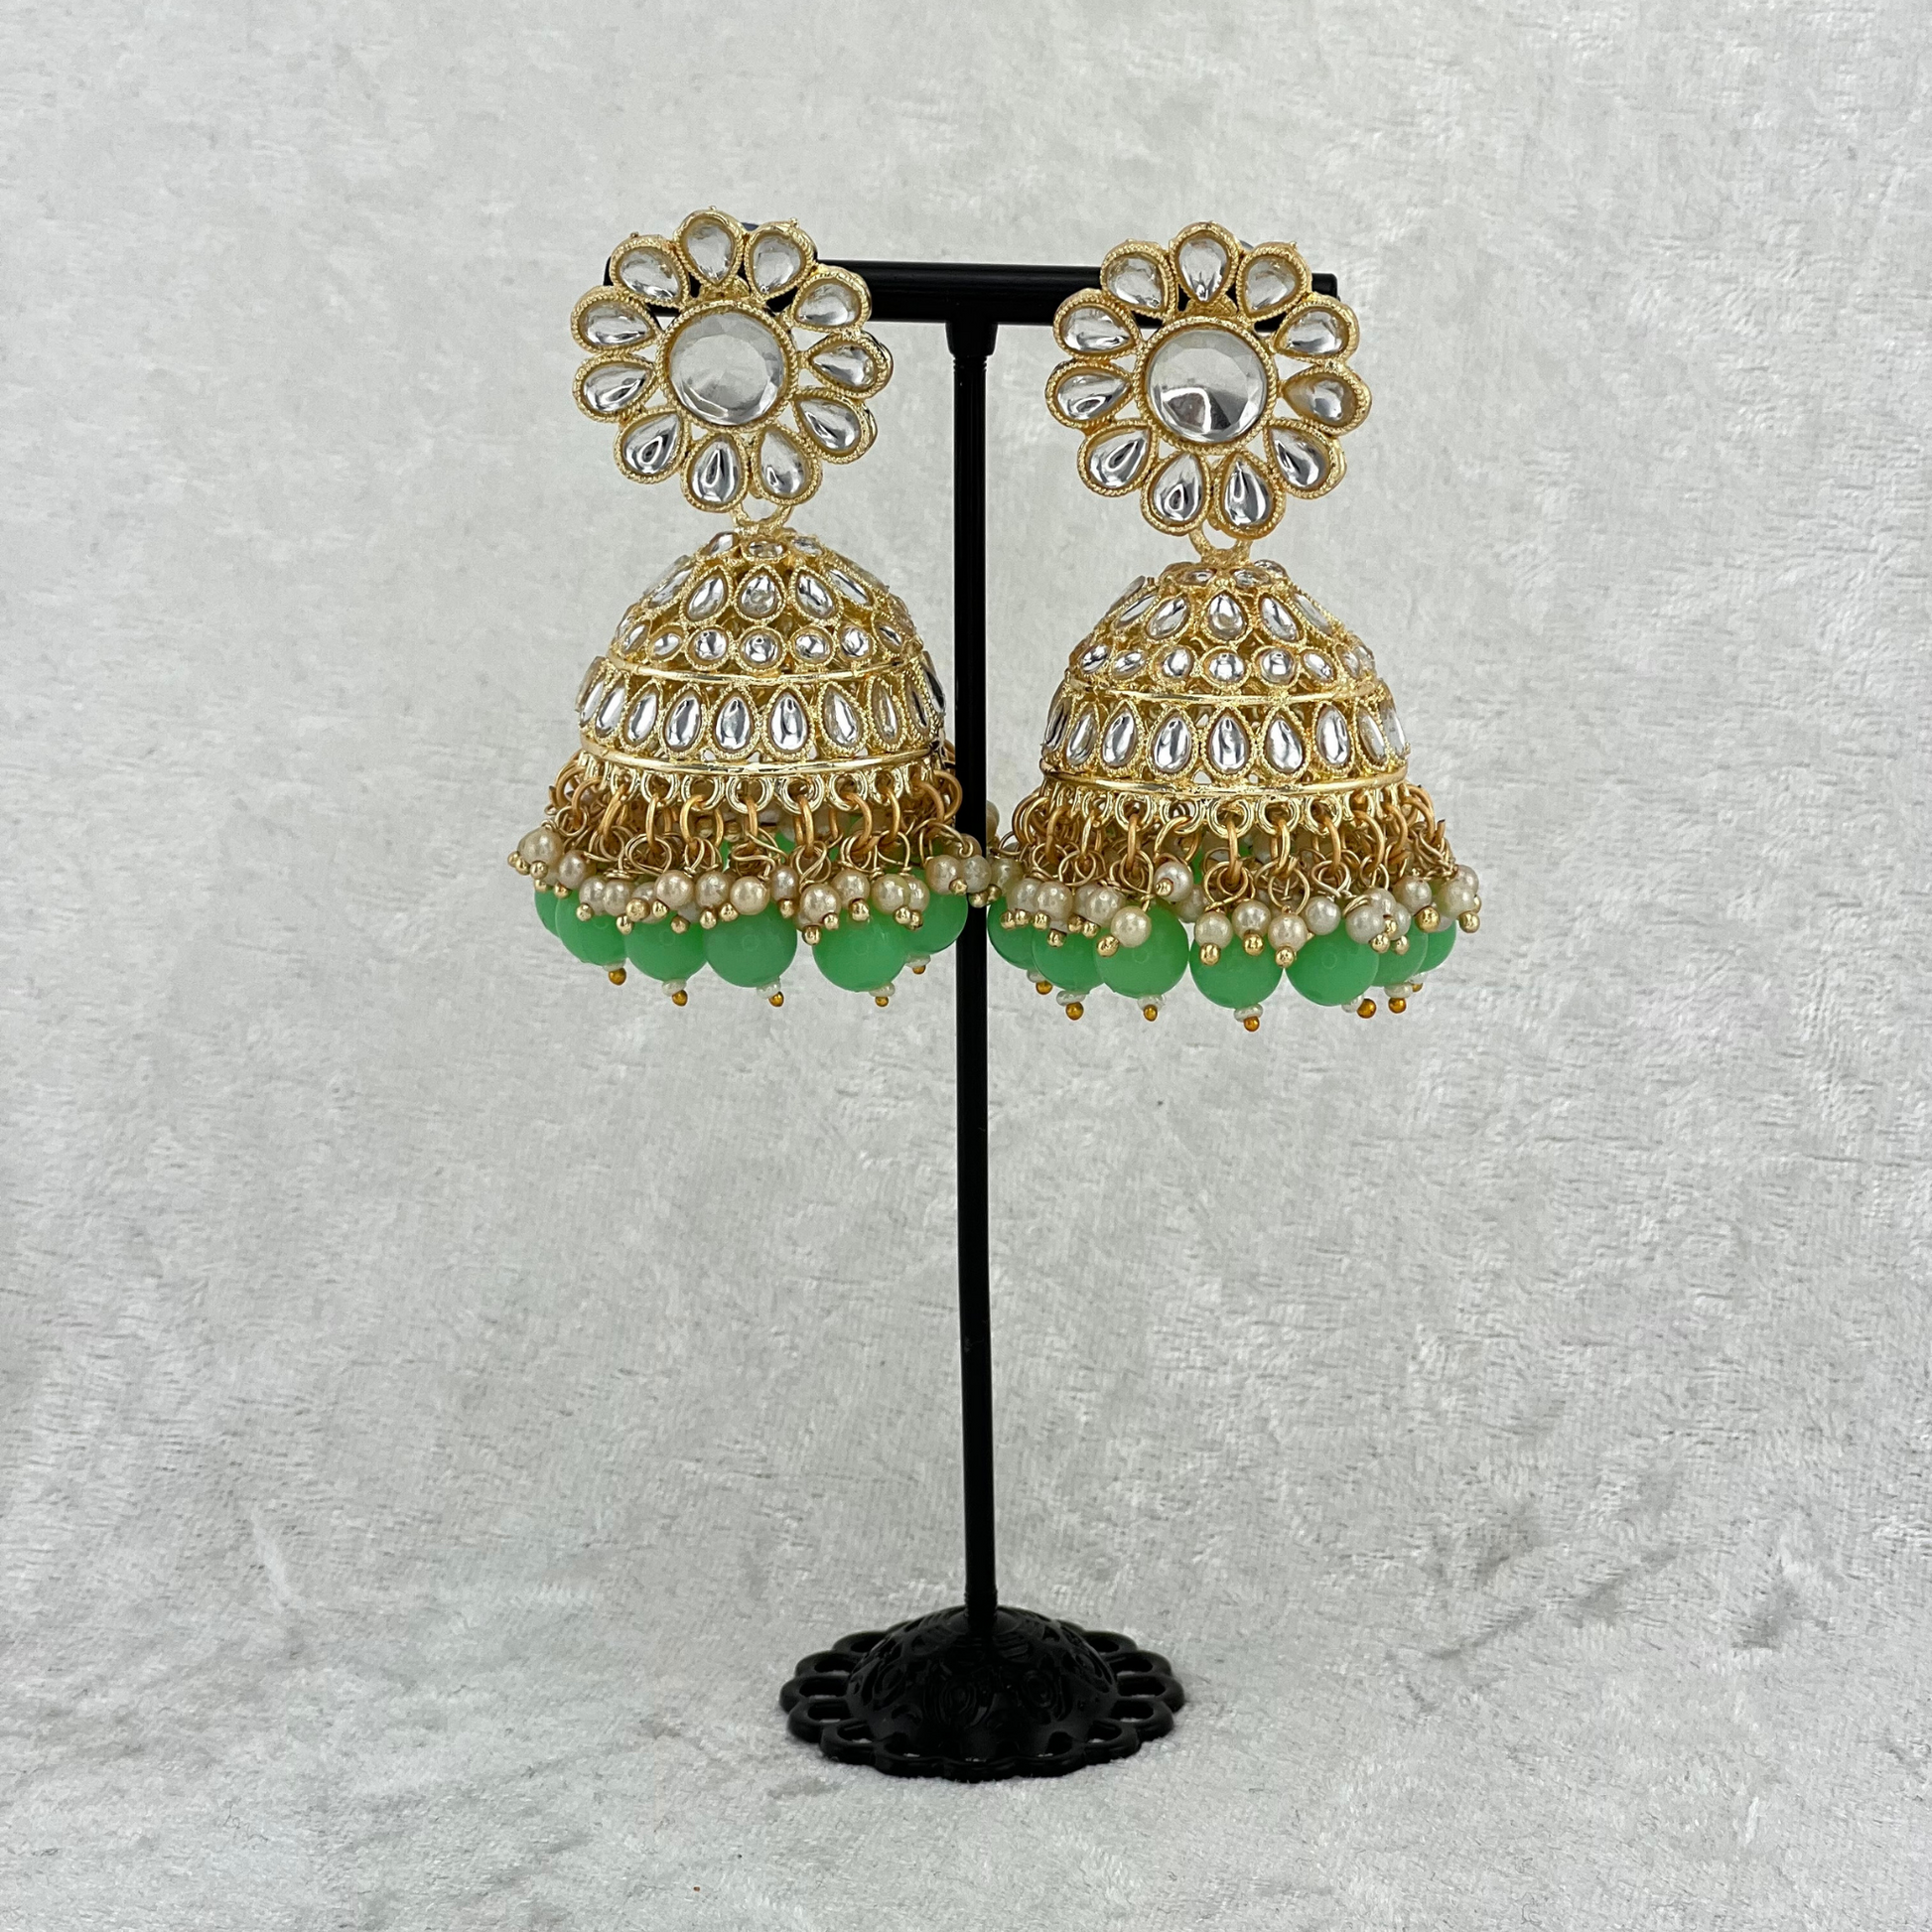 Jhumka earrings in mint green with stones, pearls and beads. Indian wedding jewellery prefect for weddings, parties and special occasions. latest high quality 2022 fashion